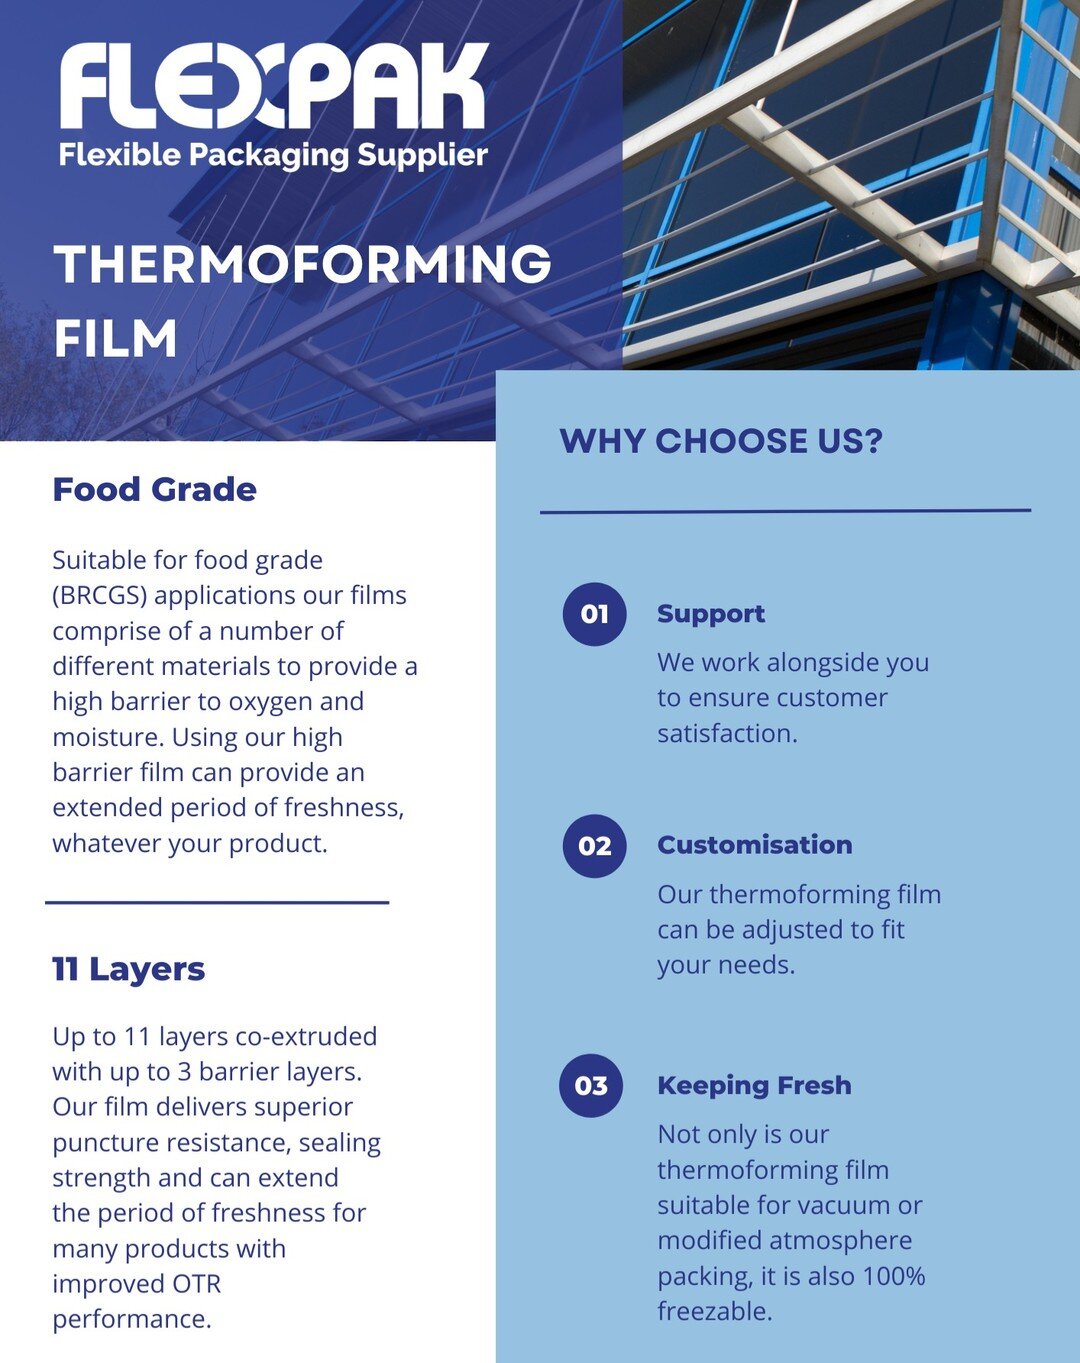 Flexpak UK now supply a variety of High Barrier films for use in thermoforming applications.

What is different about our film?

With up to 11 layers co-extruded with up to 3 barrier layers, our film delivers superior puncture resistance, sealing str